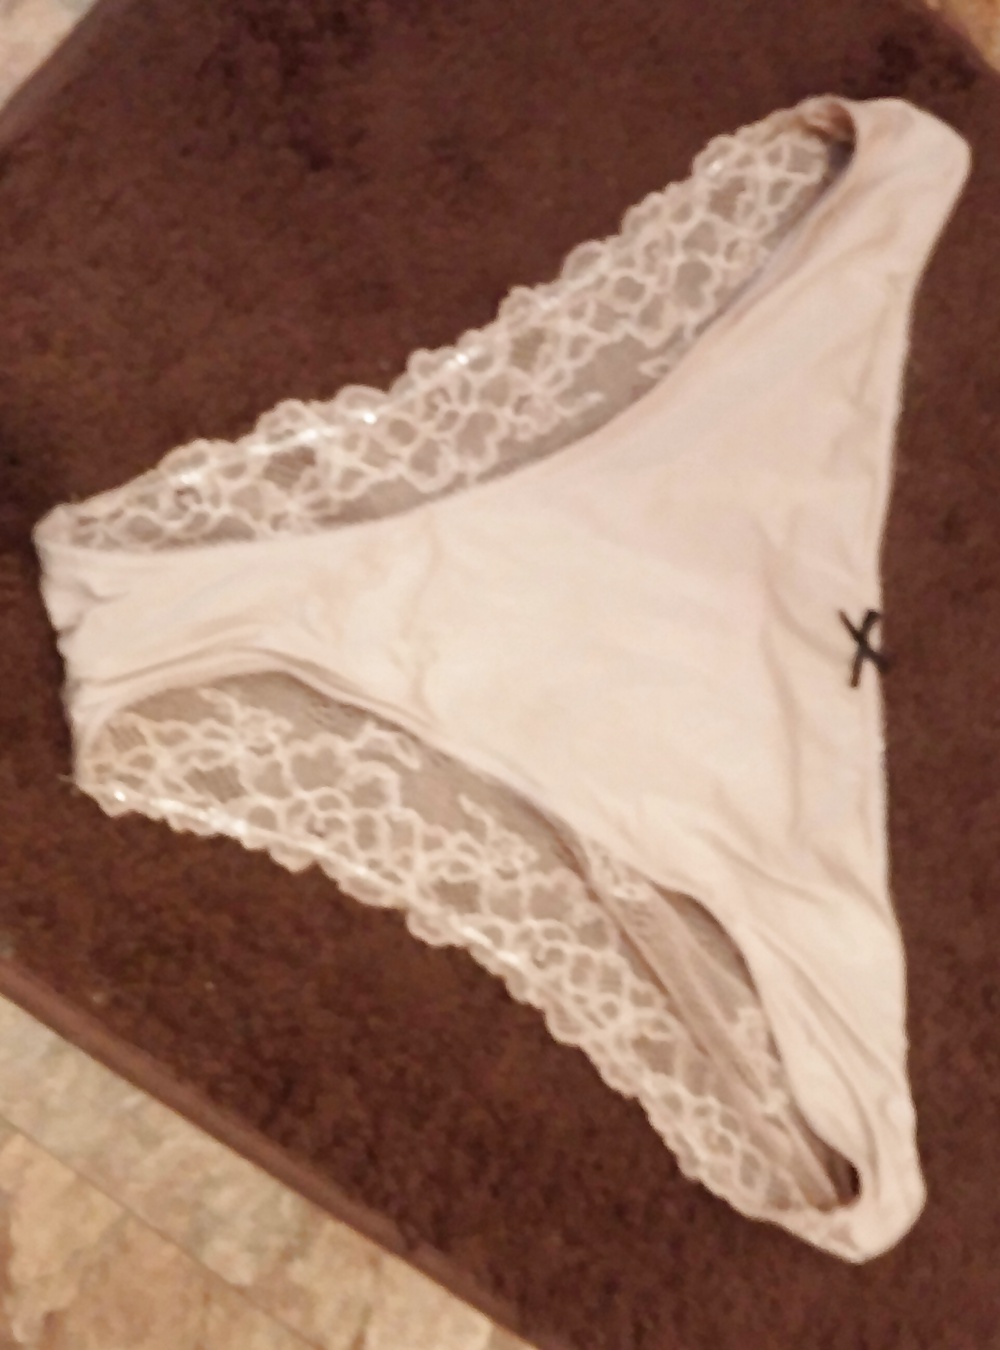 Another Pair of the Wifes Panties 